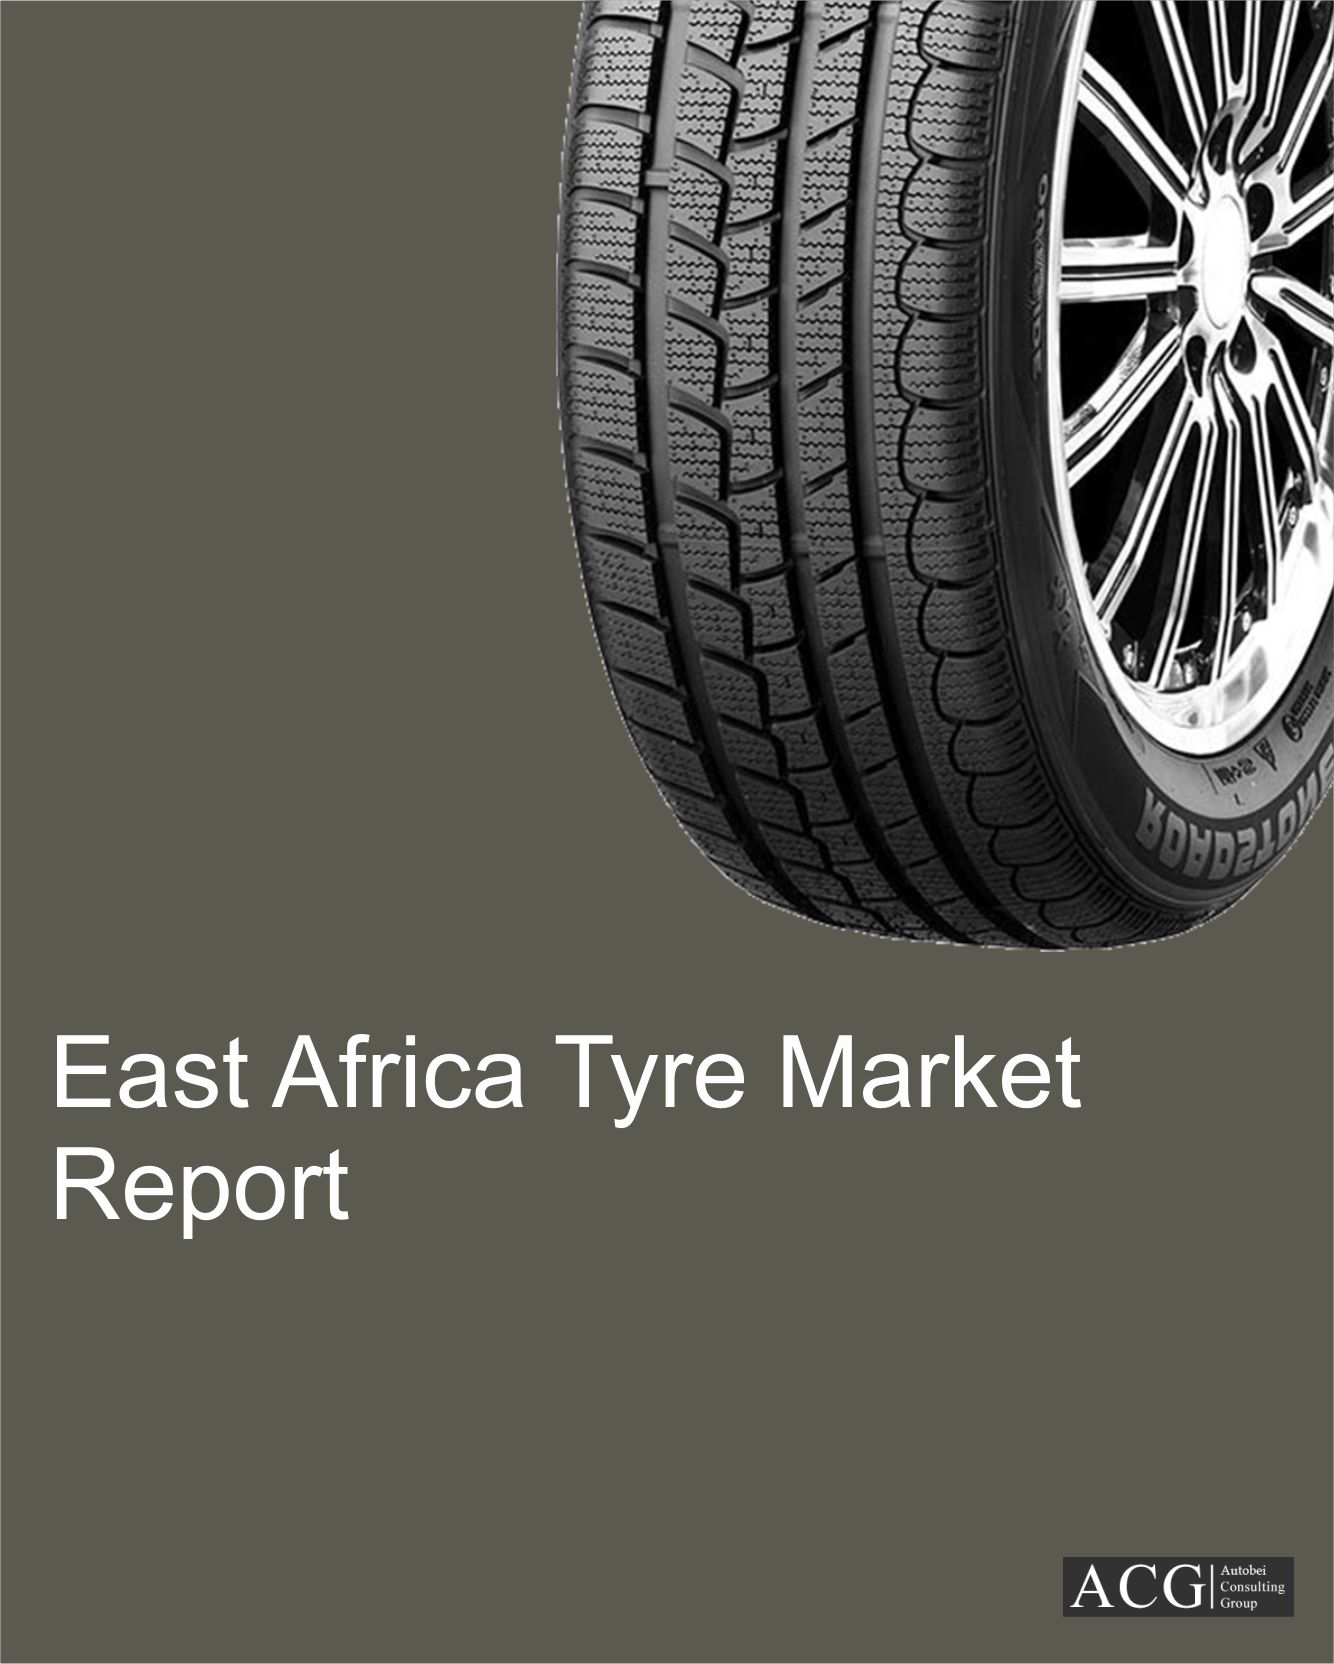 East Africa Tyre Market Report and Forecast